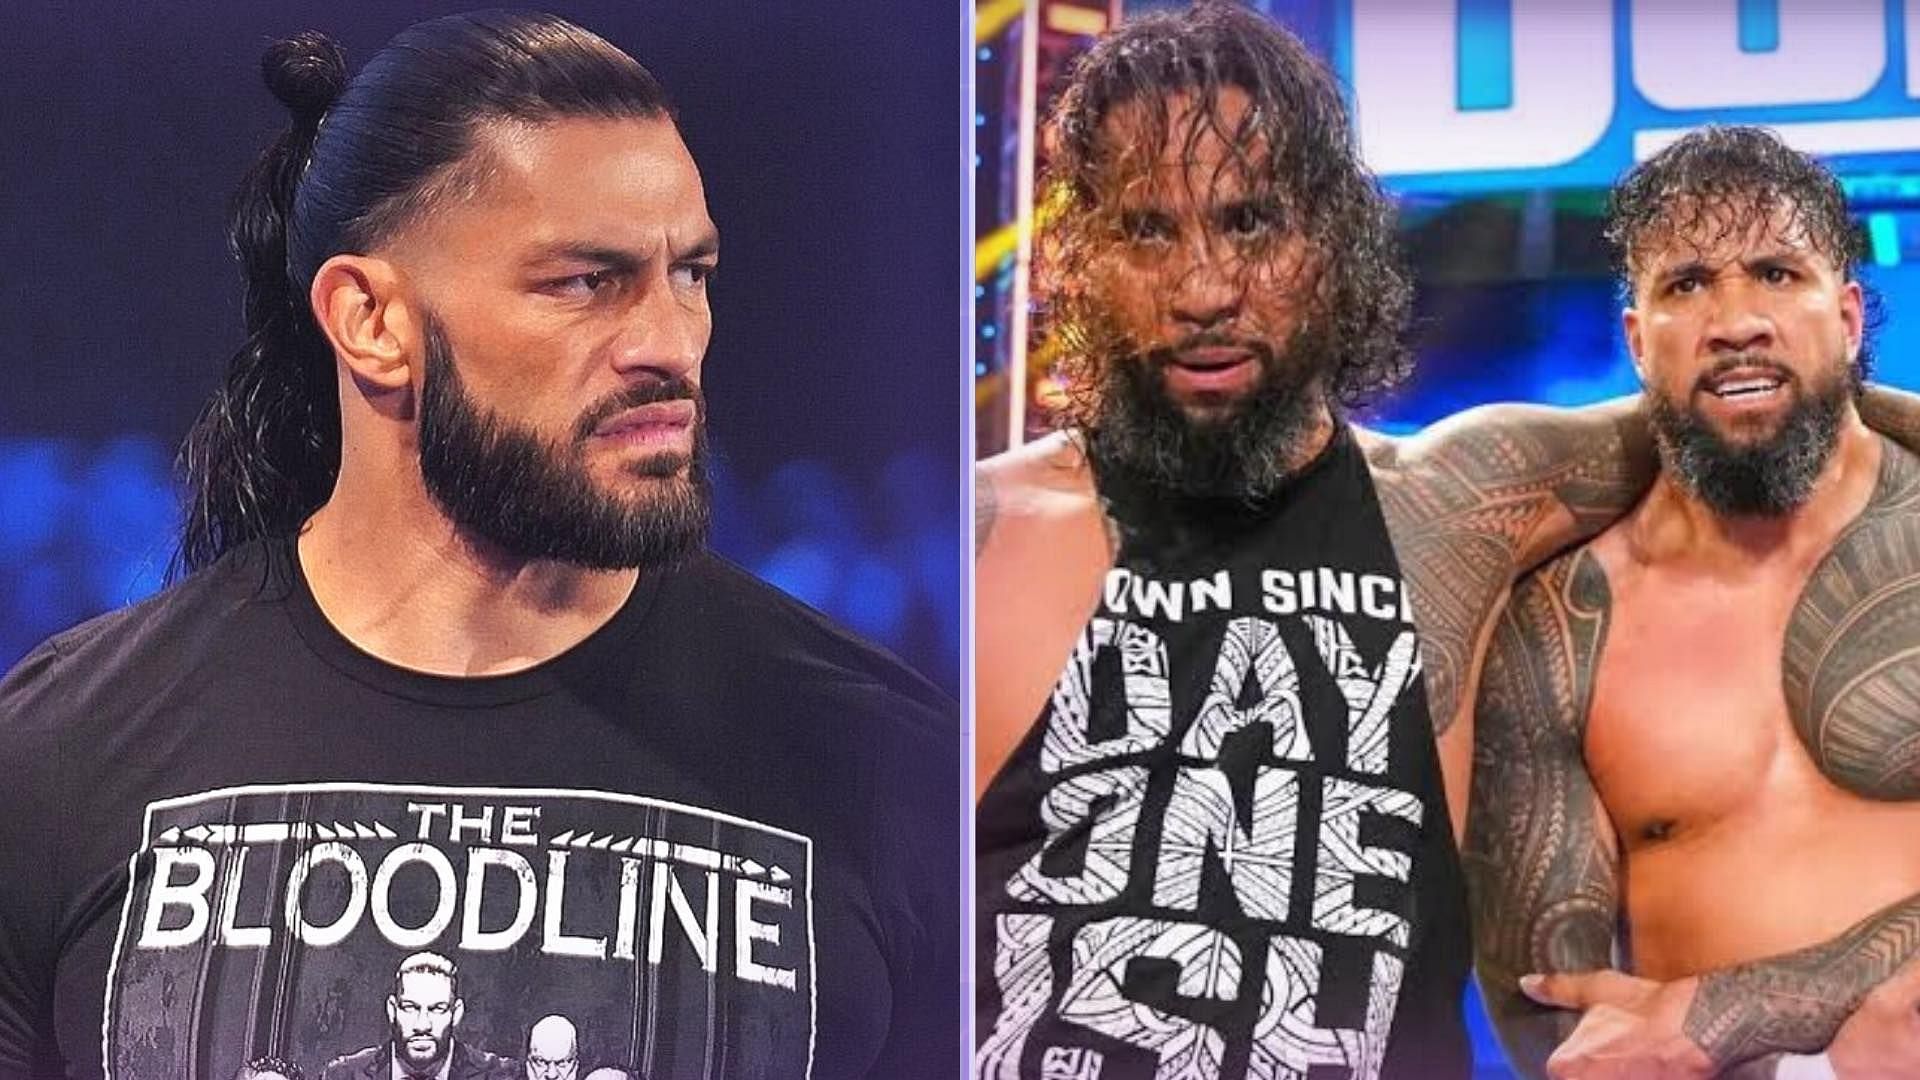 Roman Reigns was irate with The Usos this week on SmackDown